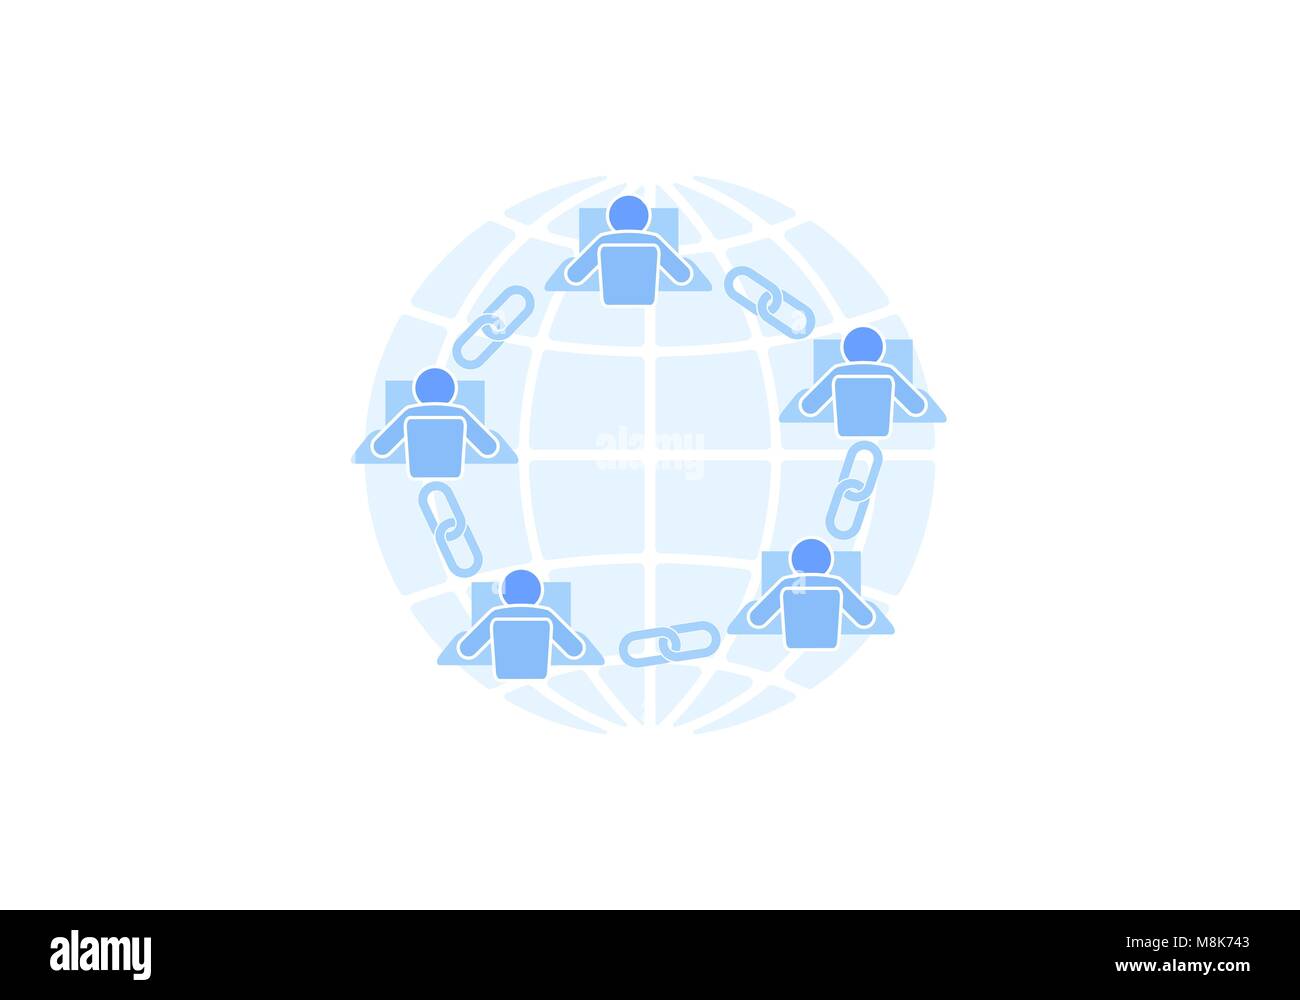 Blockchain link sign connection flat design. Internet technology chain icon hyperlink security business network concept. Blue futuristic style wire connected point vector illustration Stock Vector